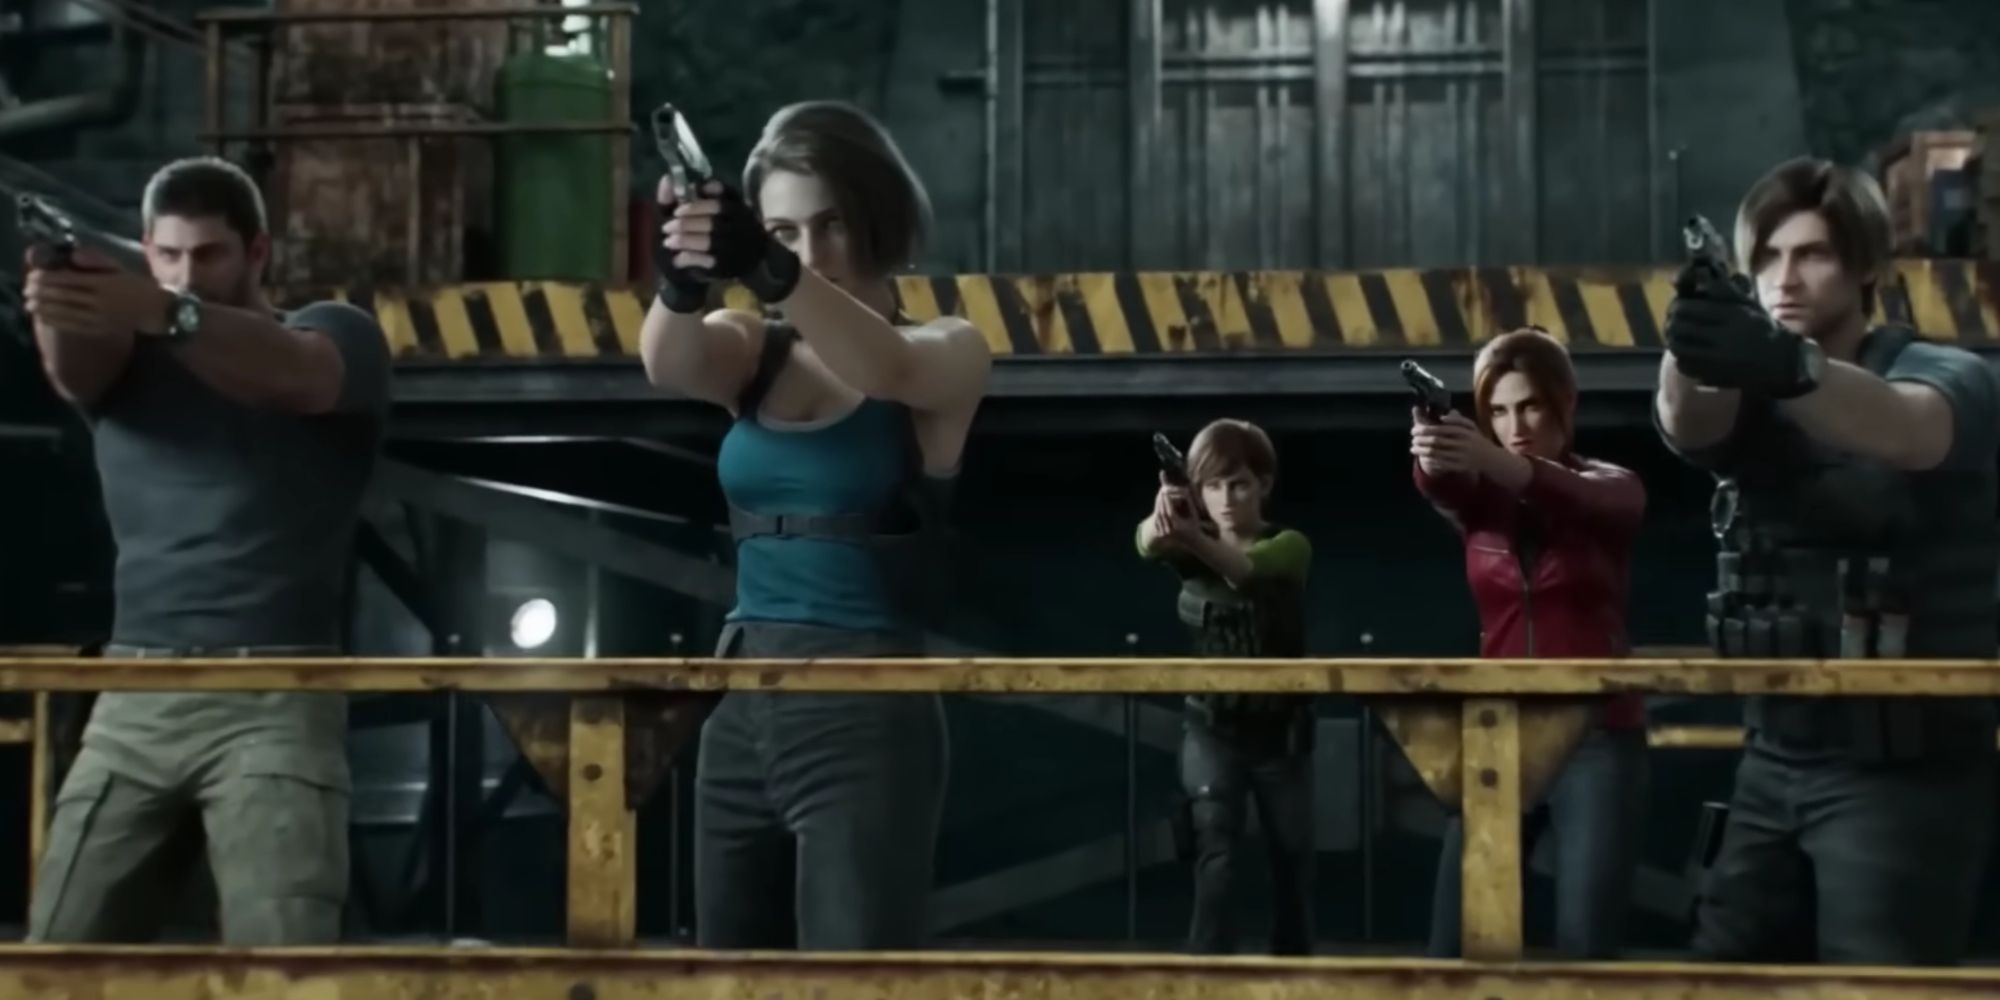 Chris, Jill, Leon, Claire, and Rebecca all stand side by side and point guns at whoever they're facing in an Avengers-worthy moment.